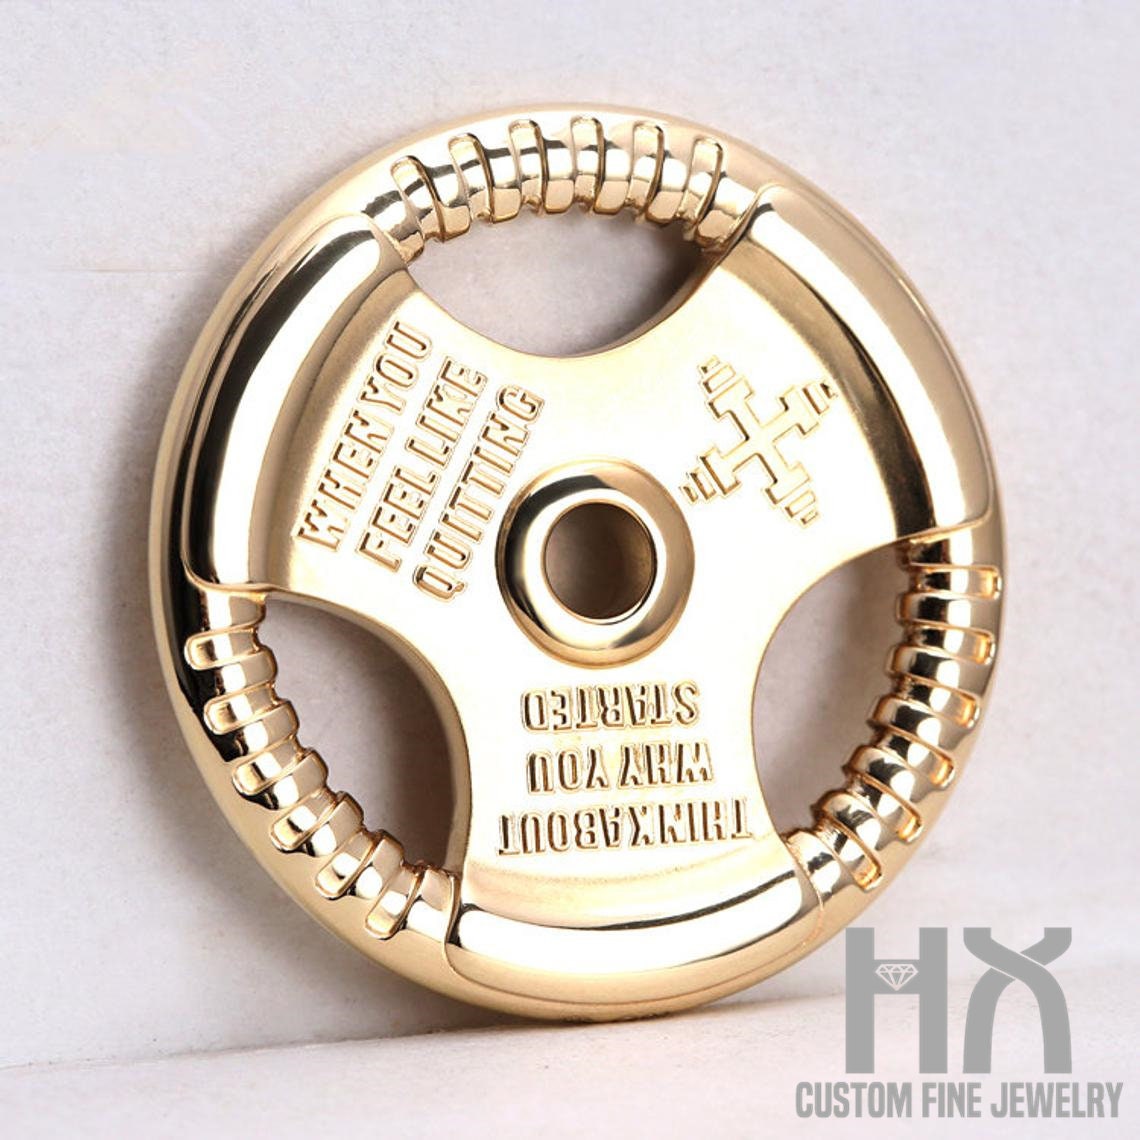 Solid 9k Gold Powerlifting Weight Plate/hx Playful Accessory/gym